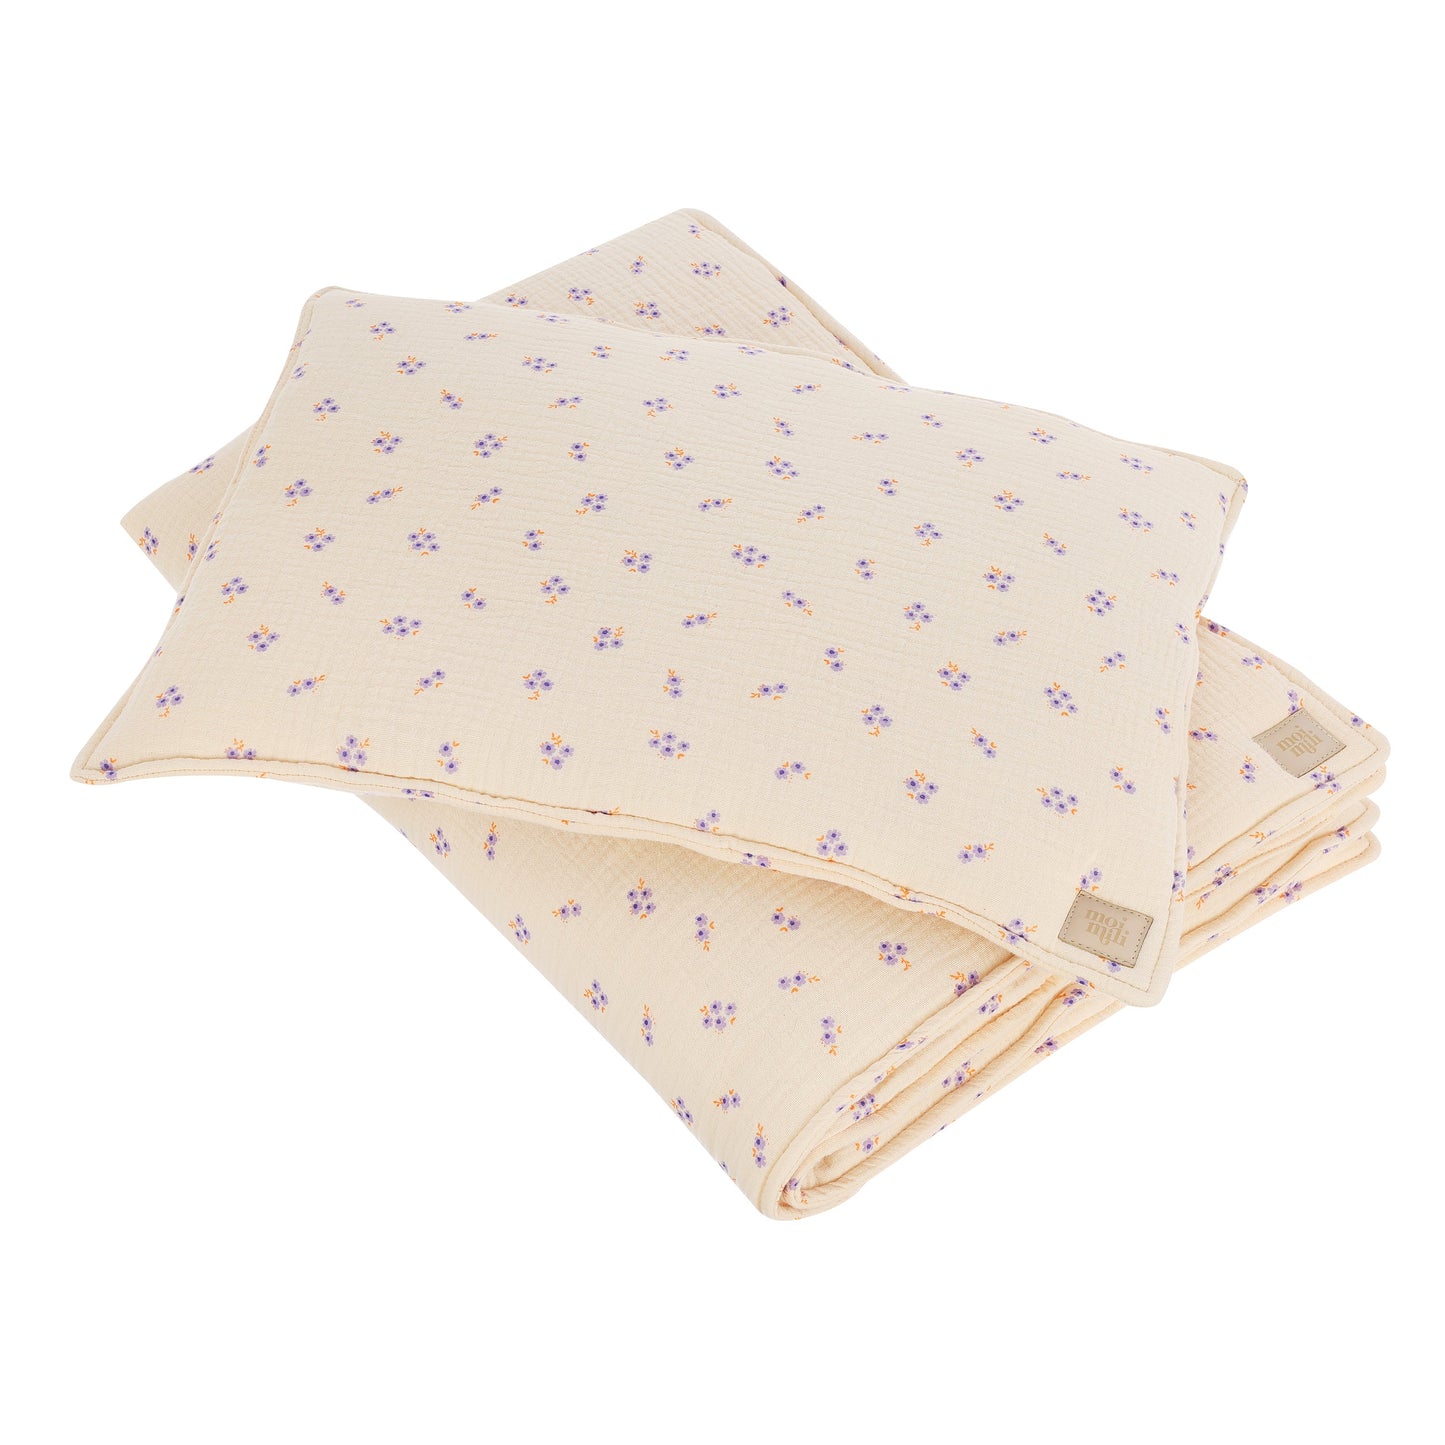 Muslin "Purple forget-me-not" Child Cover Set